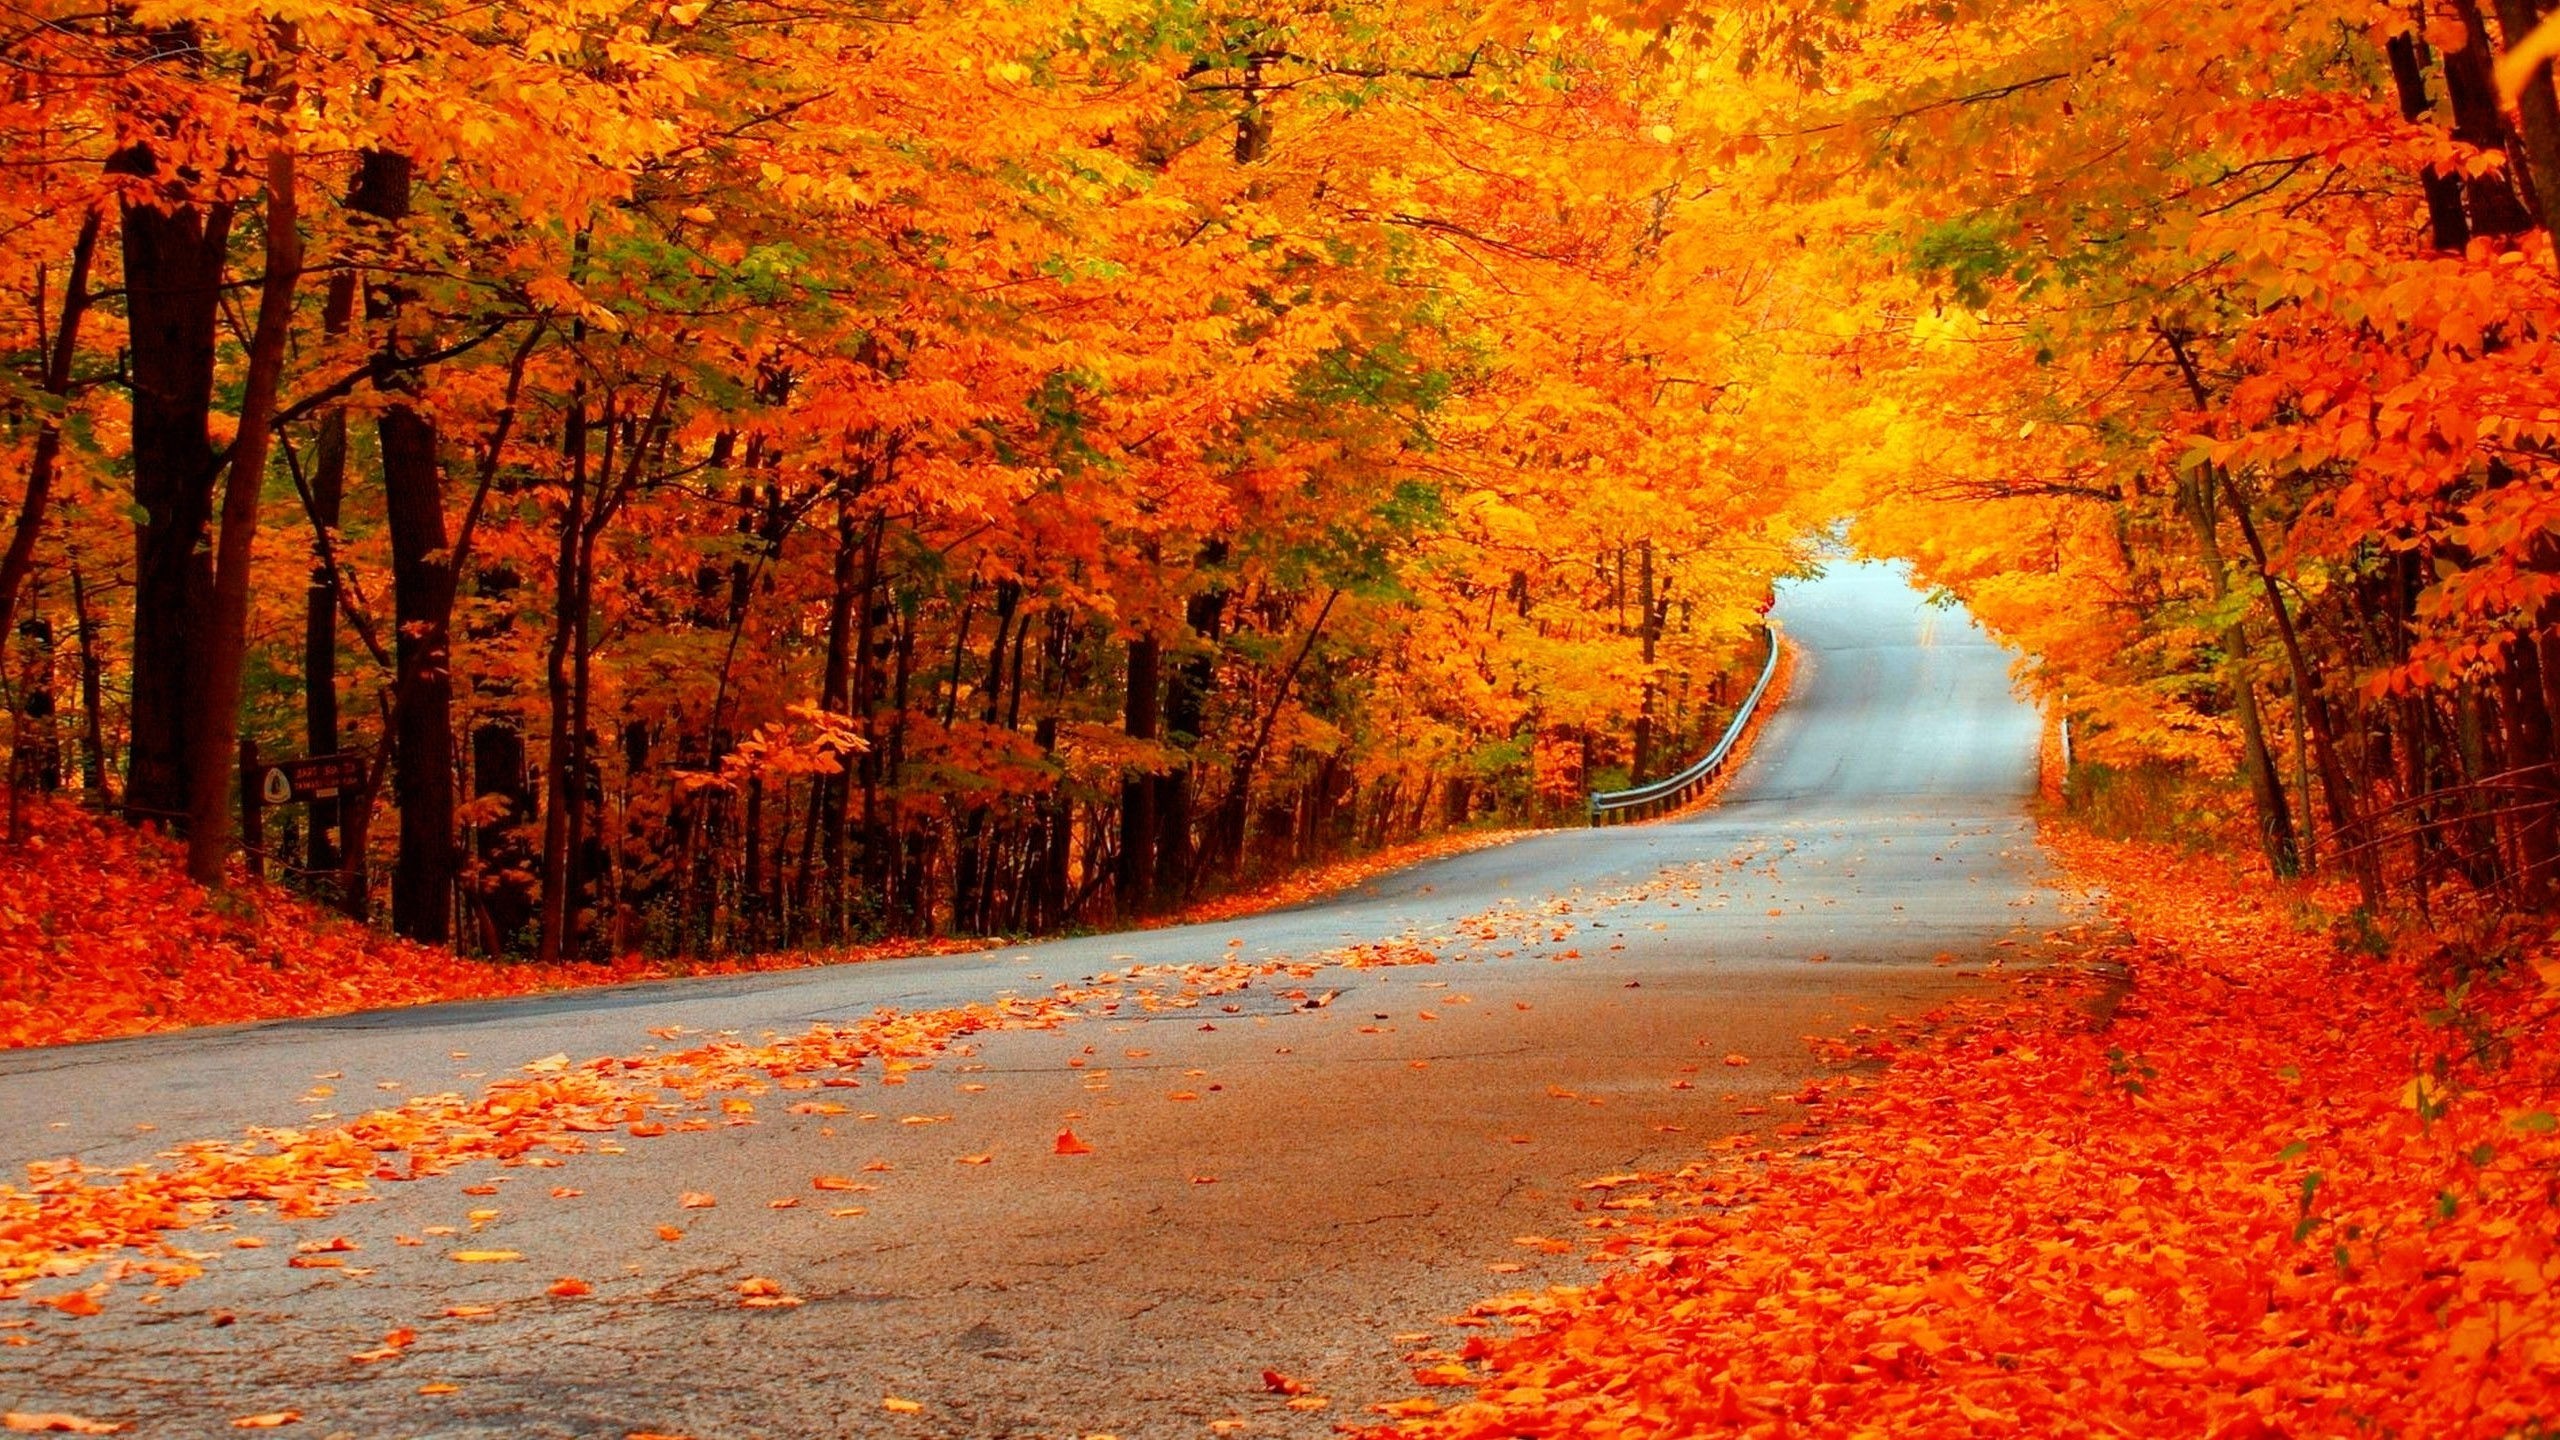 General 2560x1440 fall road trees leaves colorful outdoors fallen leaves